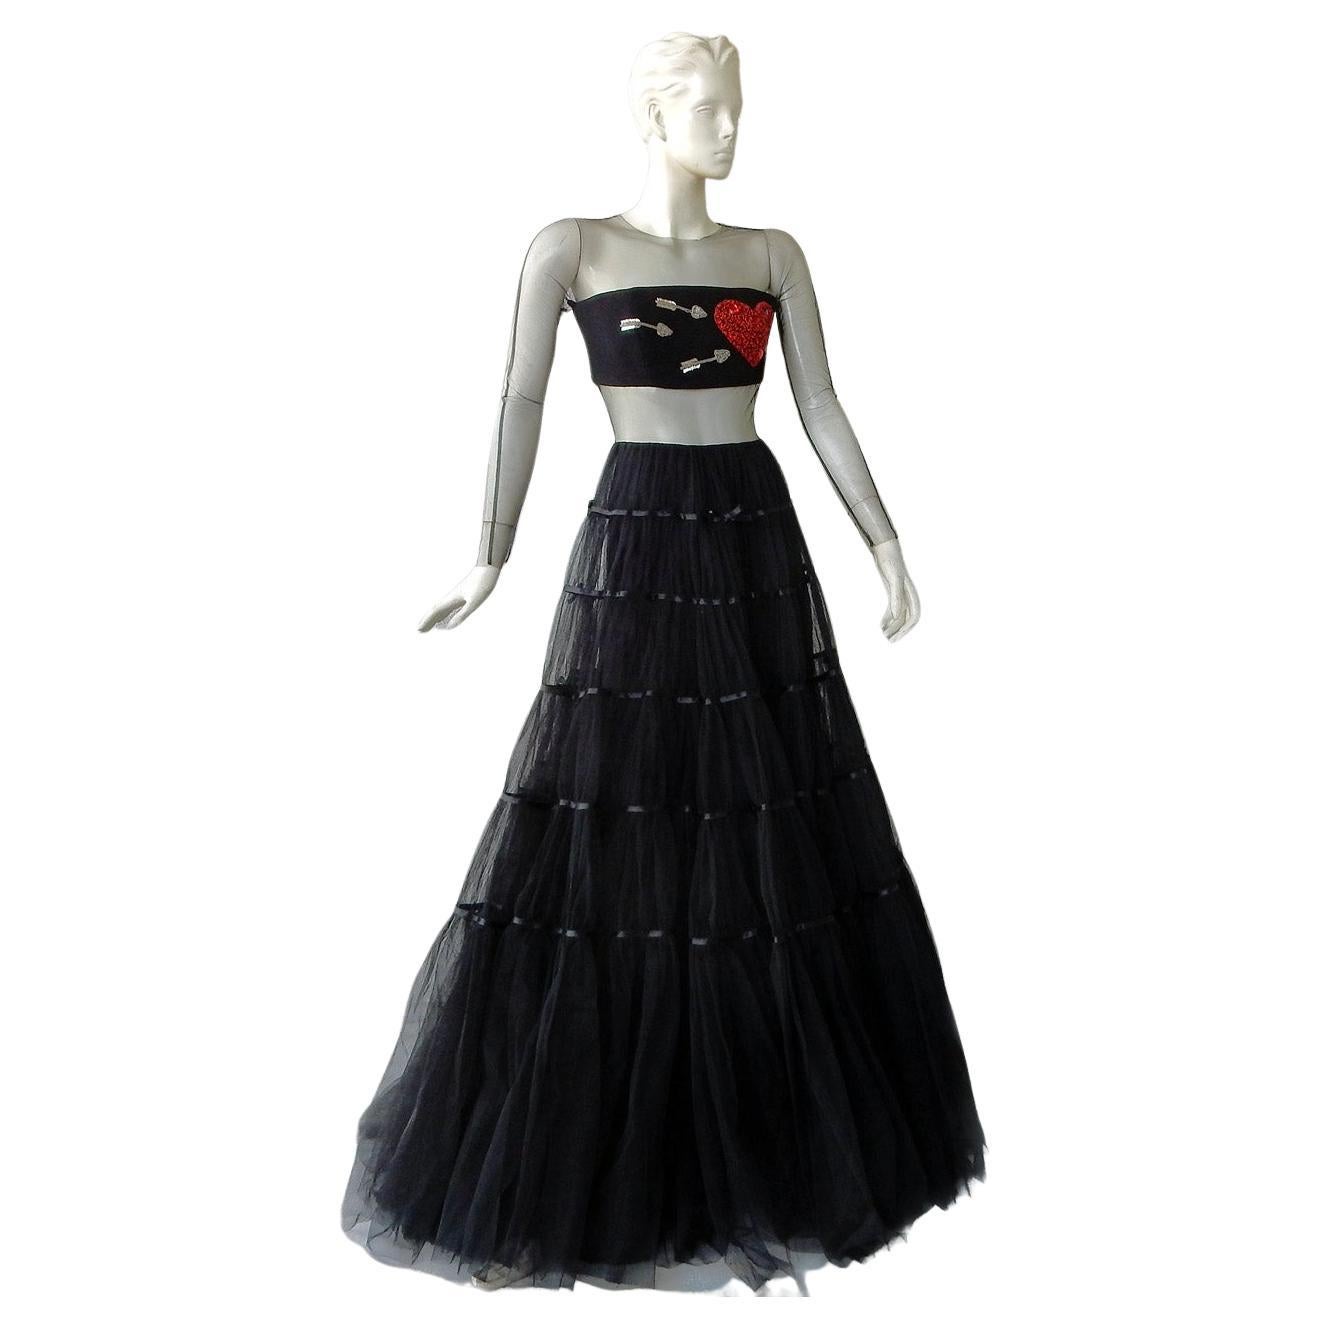 Isabel Sanchis "Valentine Pick" Jeweled Heart Runway Gown For Sale